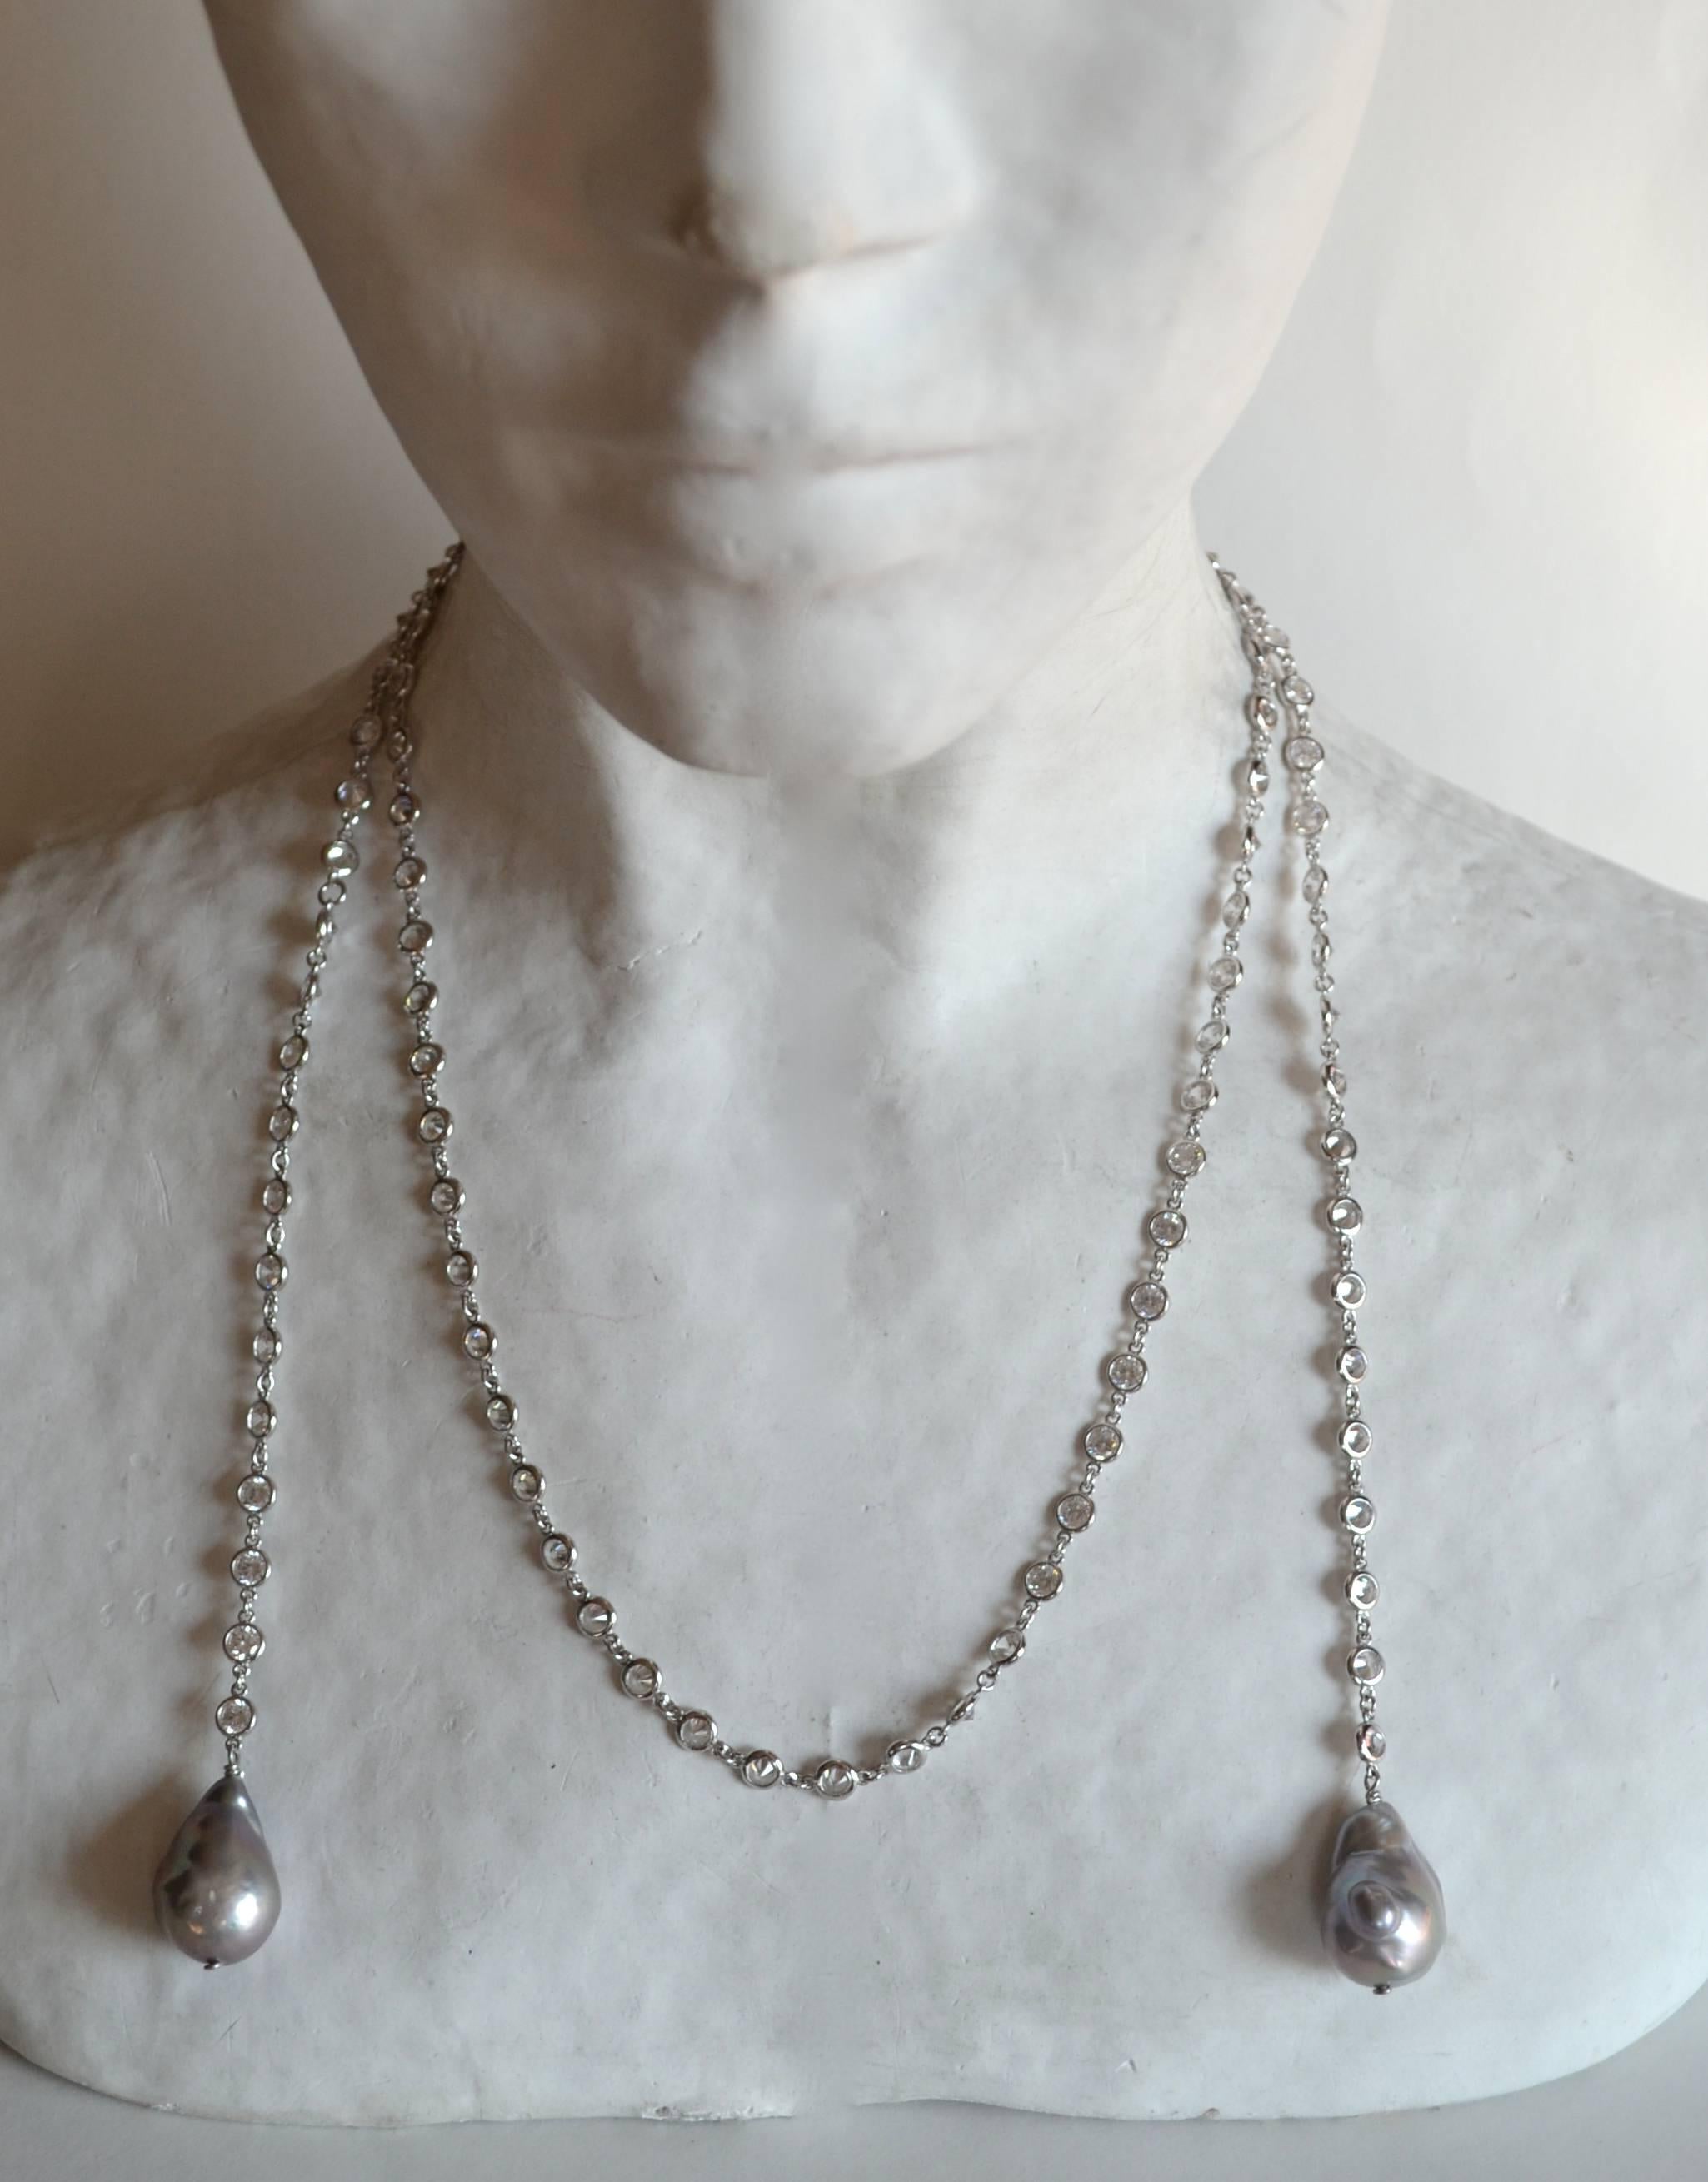 Cubic Zirconia lariat necklace in rhodium plate with Baroque Pearl drops from Bijoux Num. 